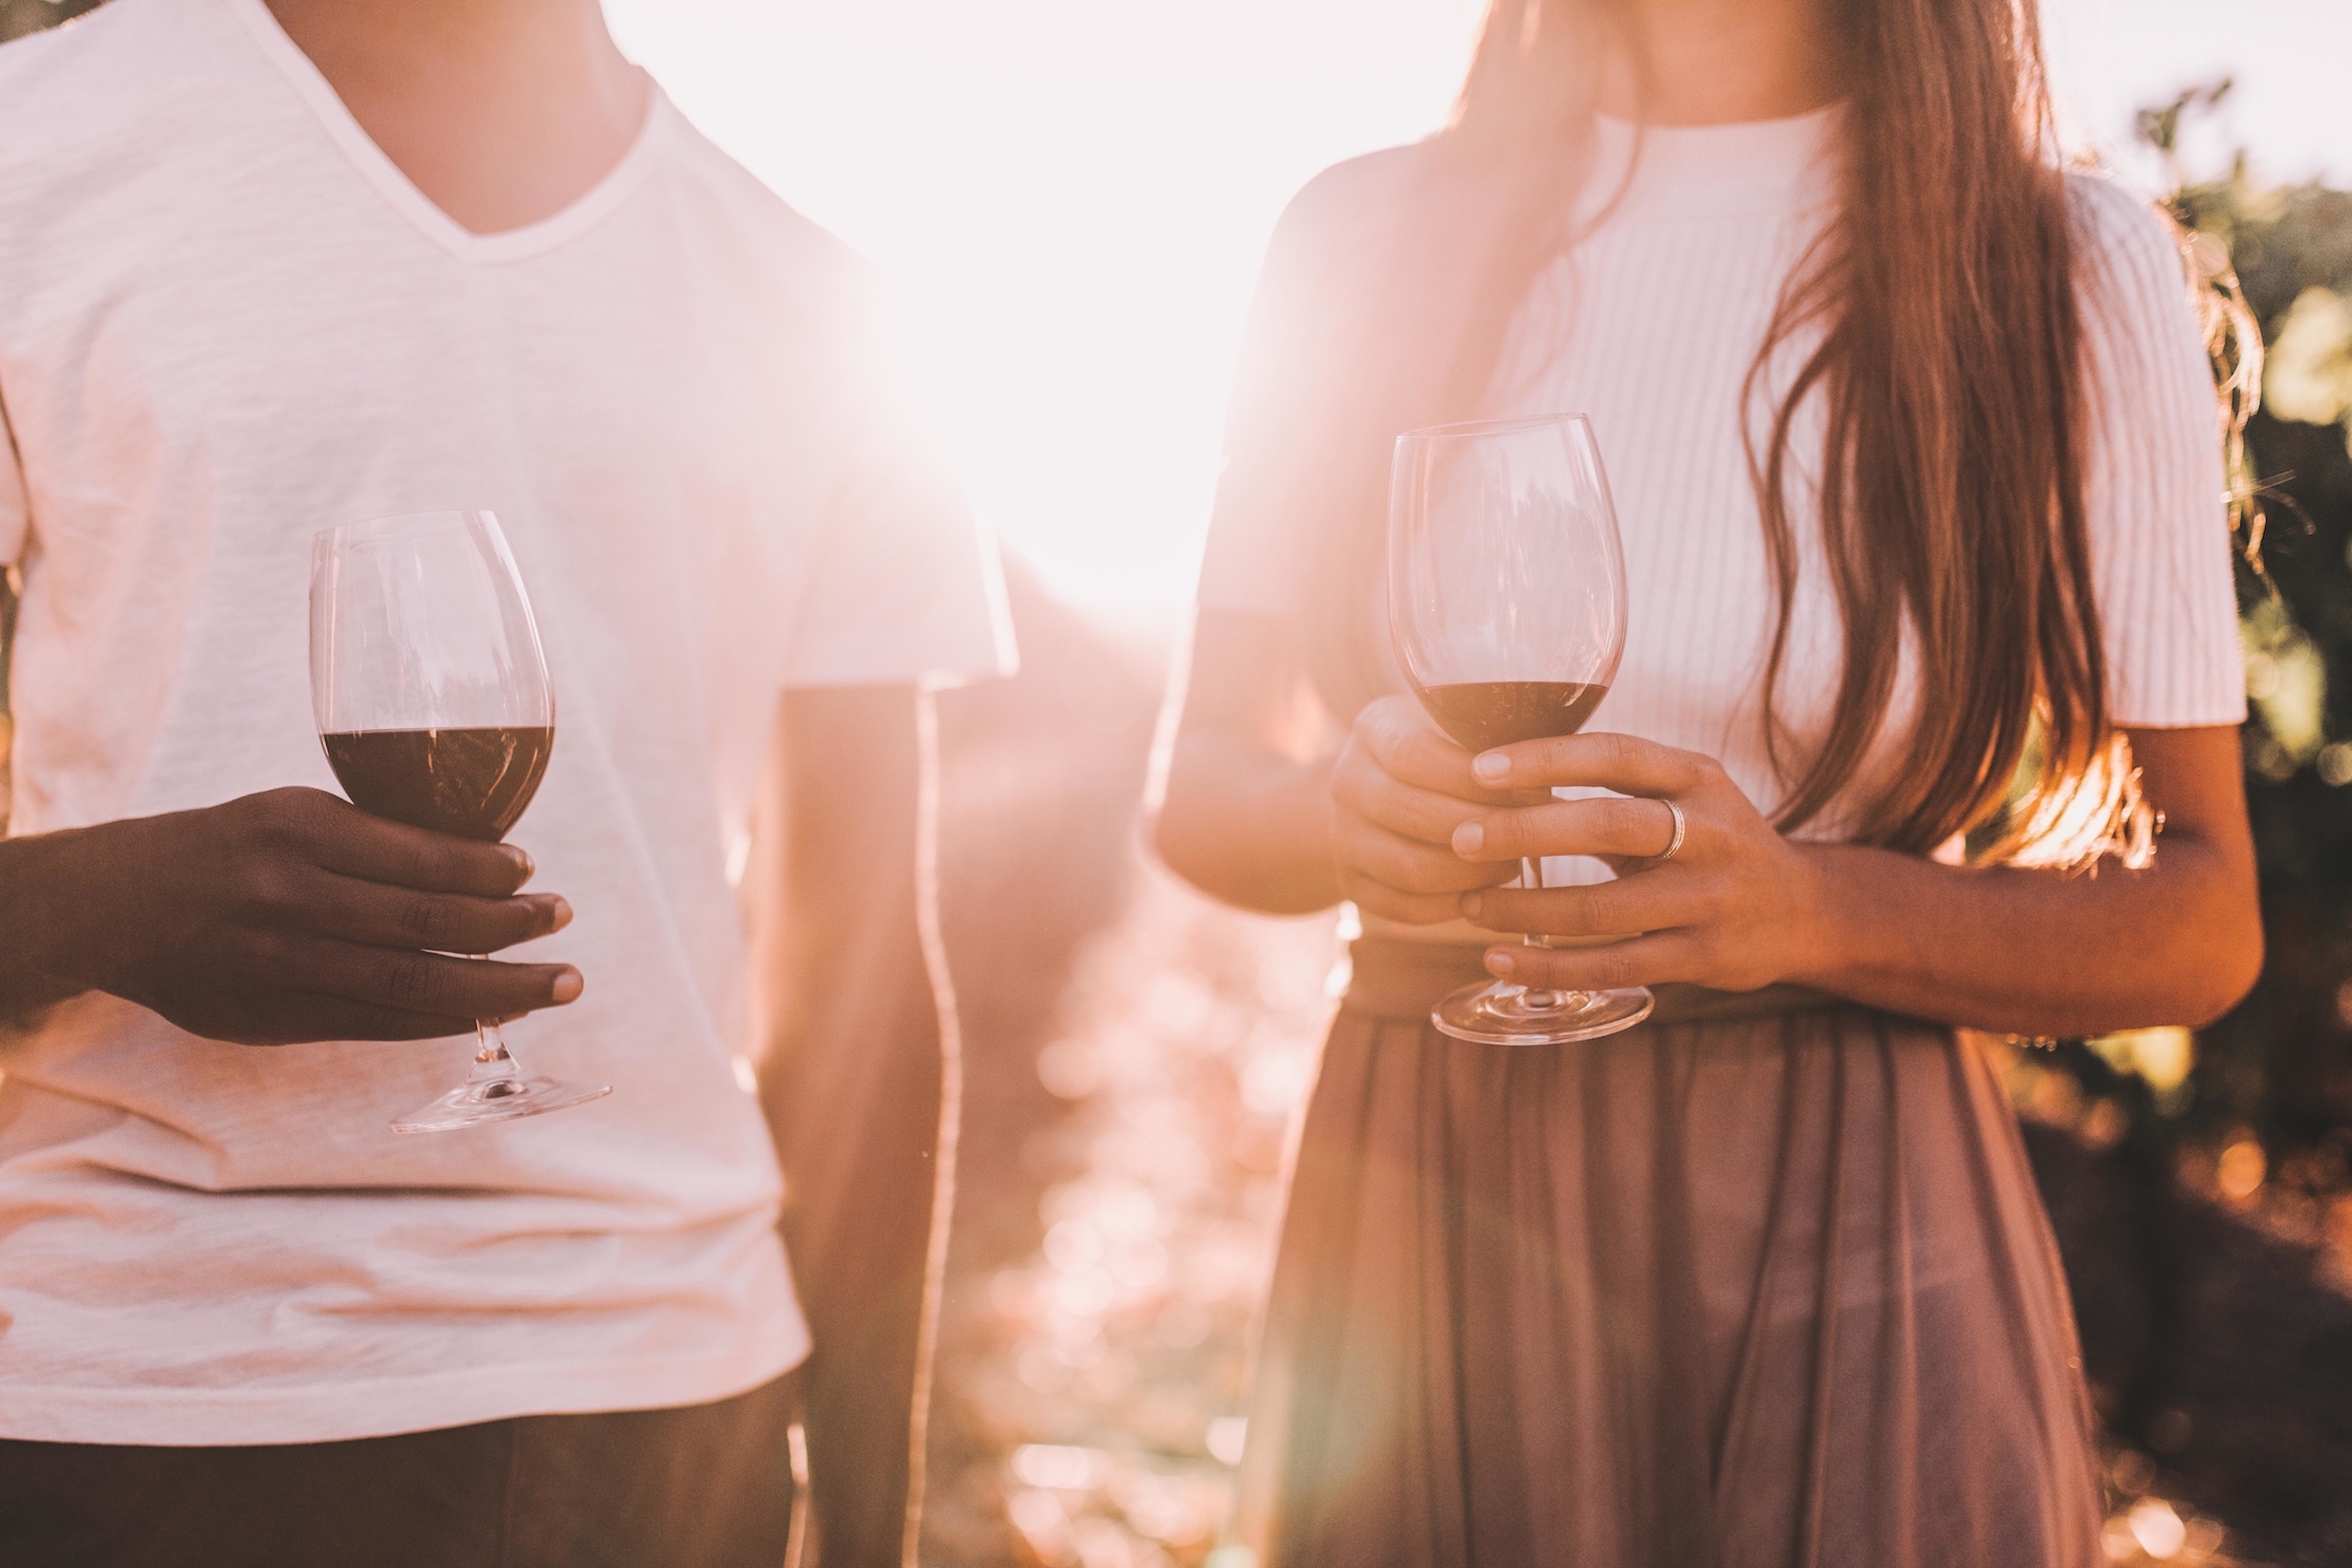 6-close-up-couple-summer-fun-alcohol-party-wine-wine-wine-glass-together-drinking.jpg